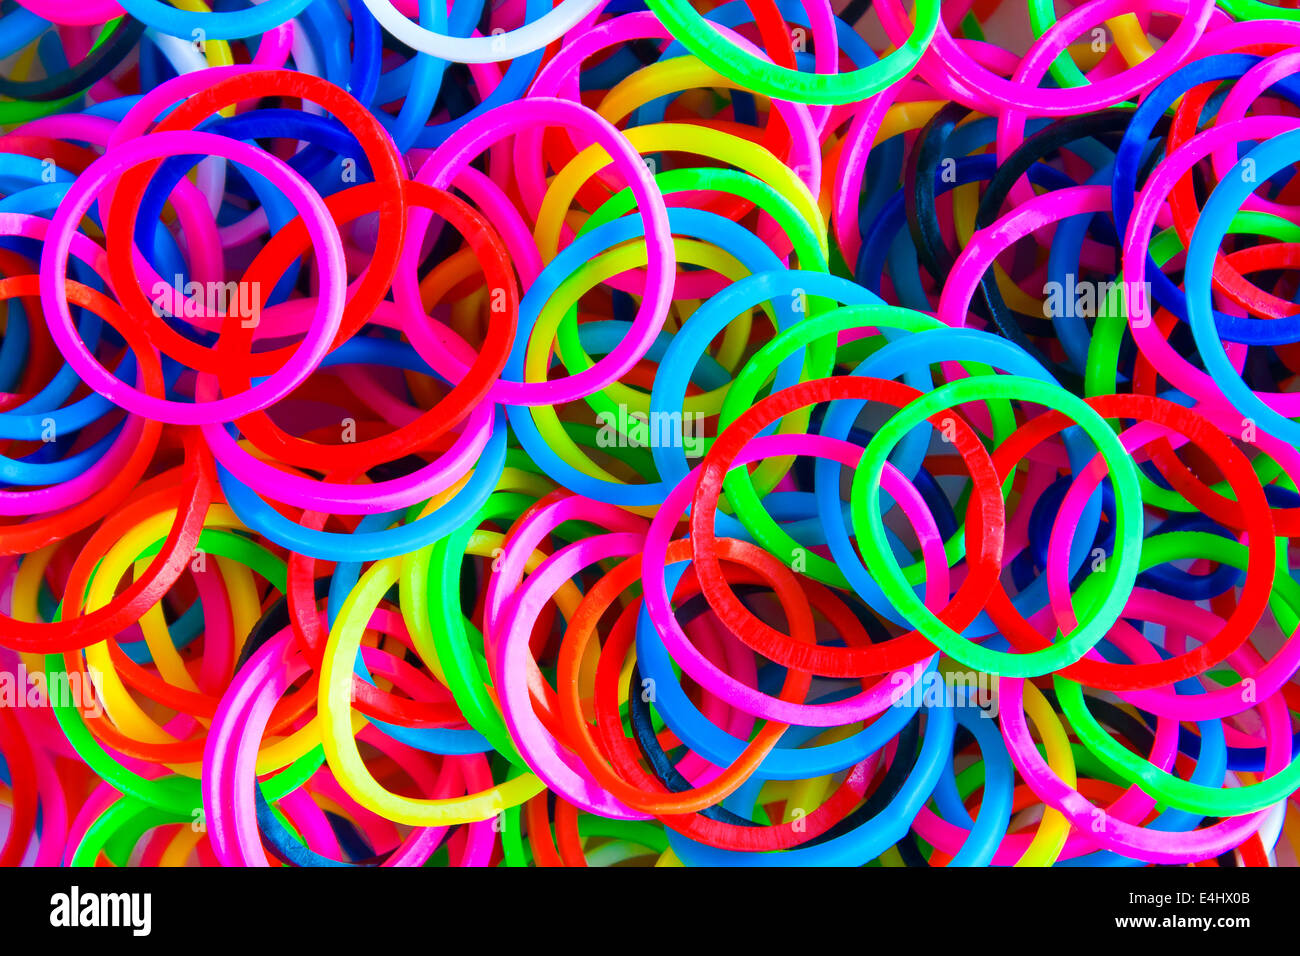 Colorful Rubber Bands With Circular Space Background Stock Photo